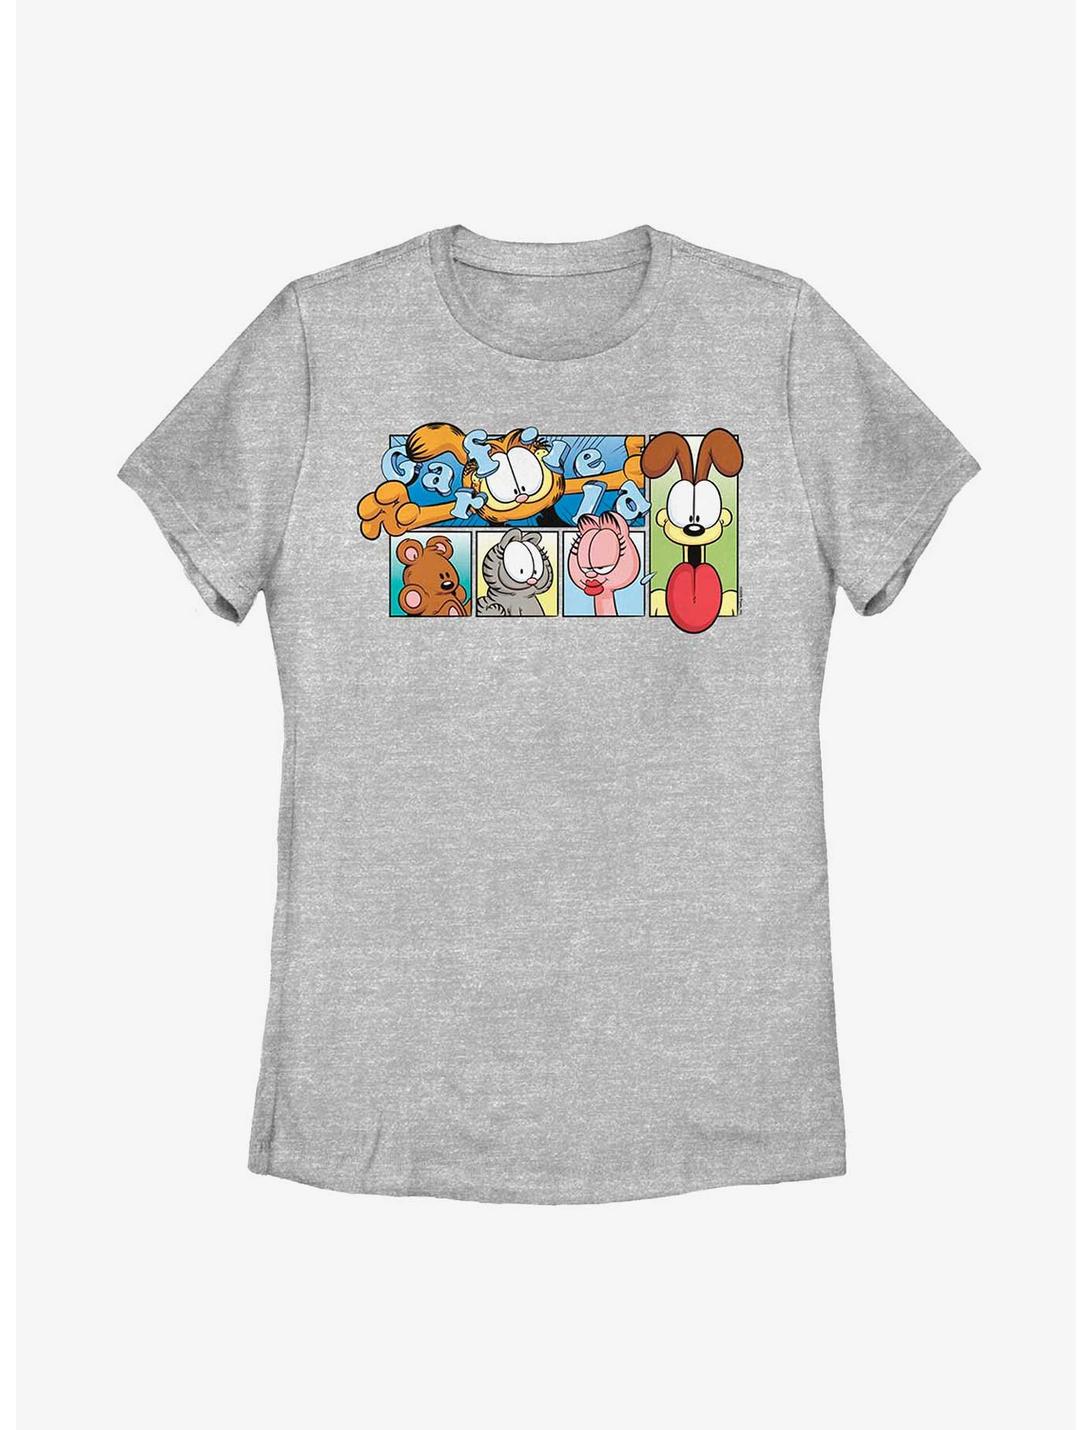 Garfield and Friends Women's T-Shirt, ATH HTR, hi-res